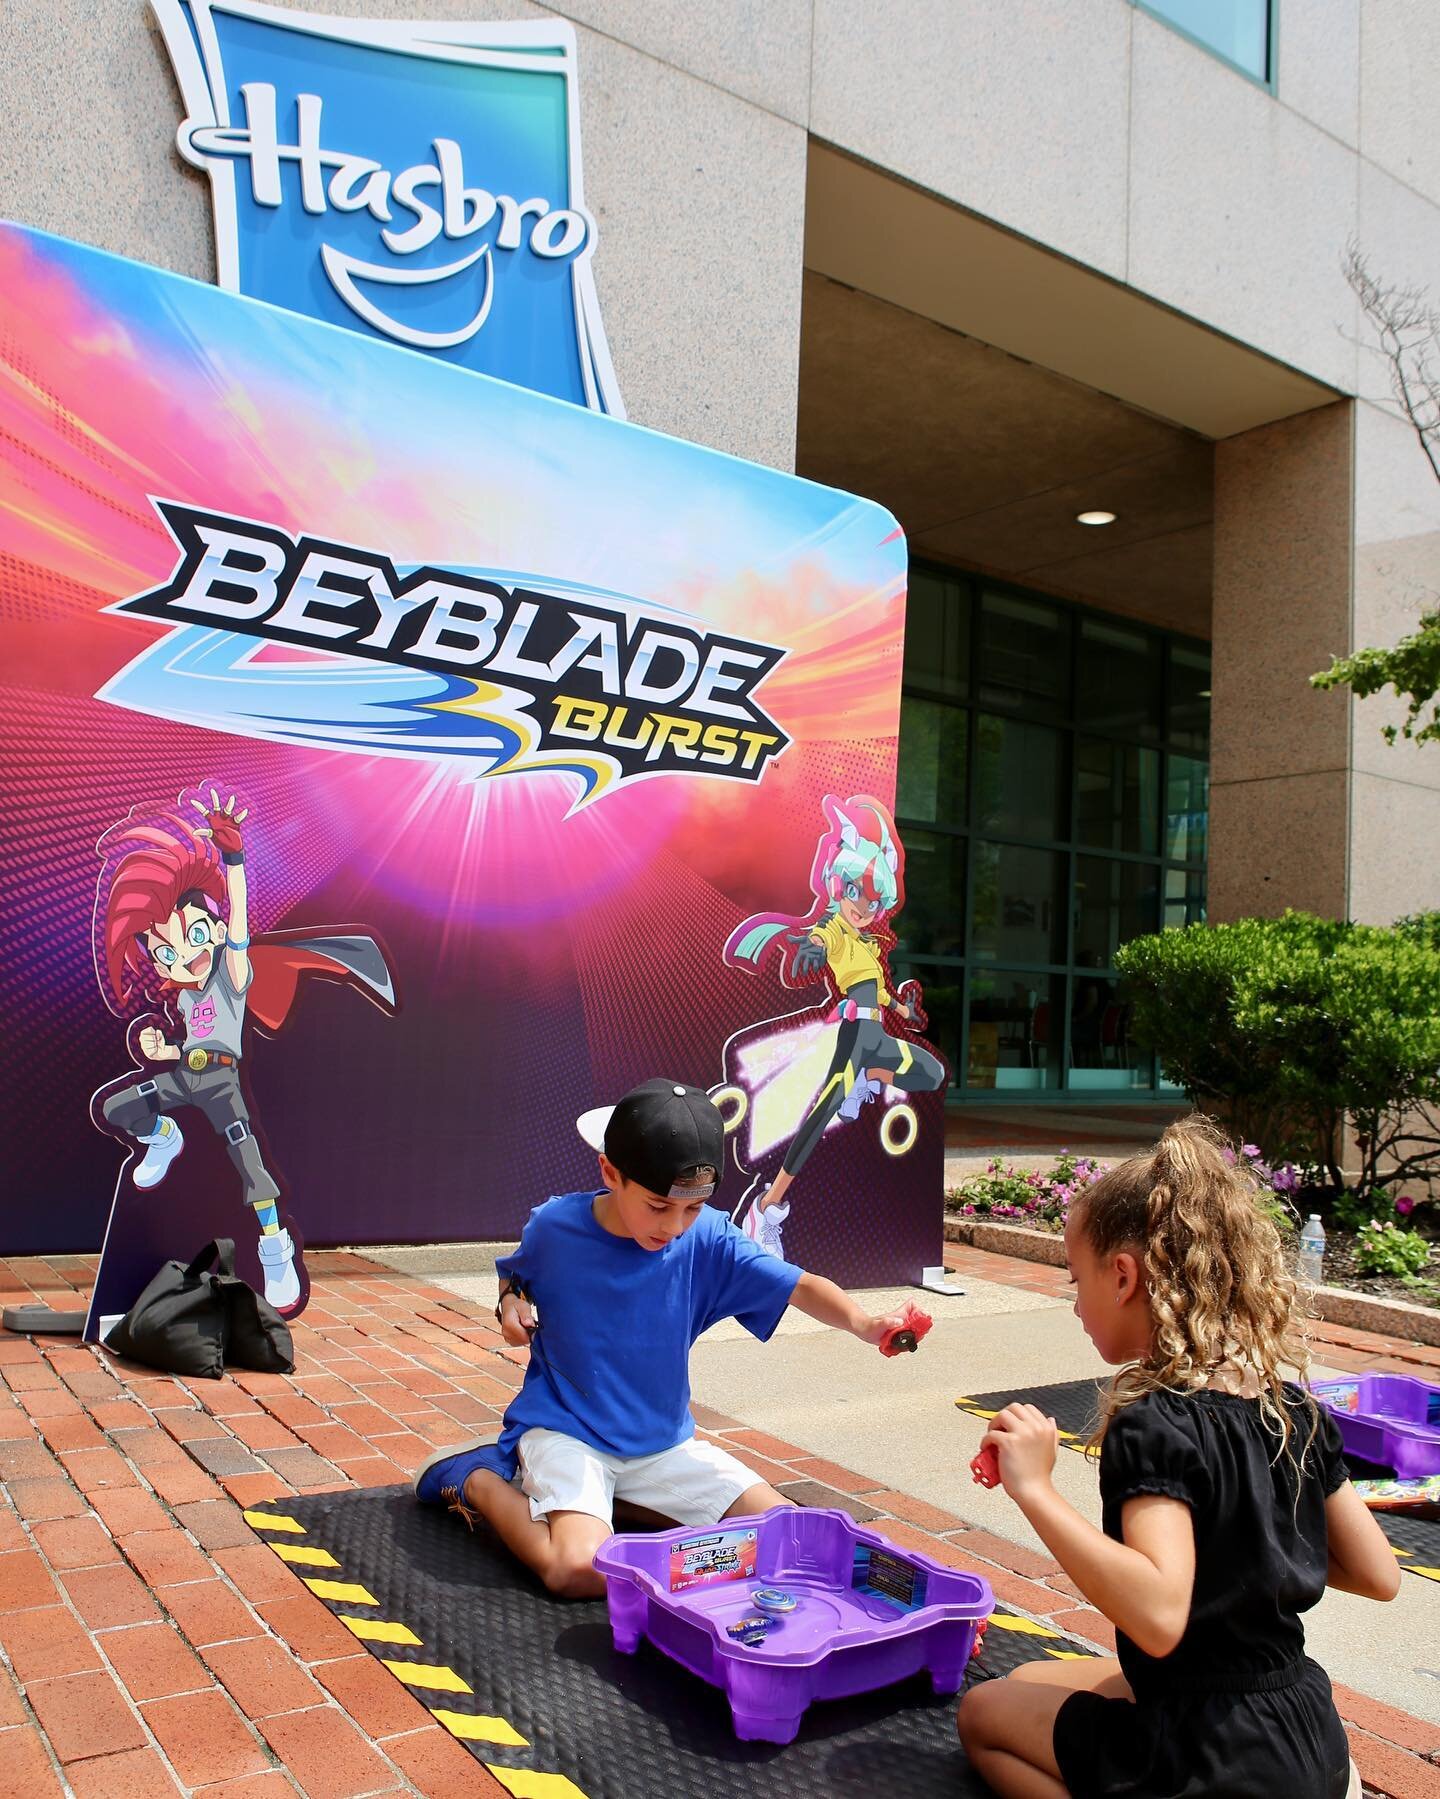 It was a summer of epic battles, heart-pounding moments, and the thrill of victory as we unleashed the Beyblade Battle Series! Svedvik teamed up with legendary toy company Hasbro to deploy grassroots teams in 14 metropolitan areas building a movement